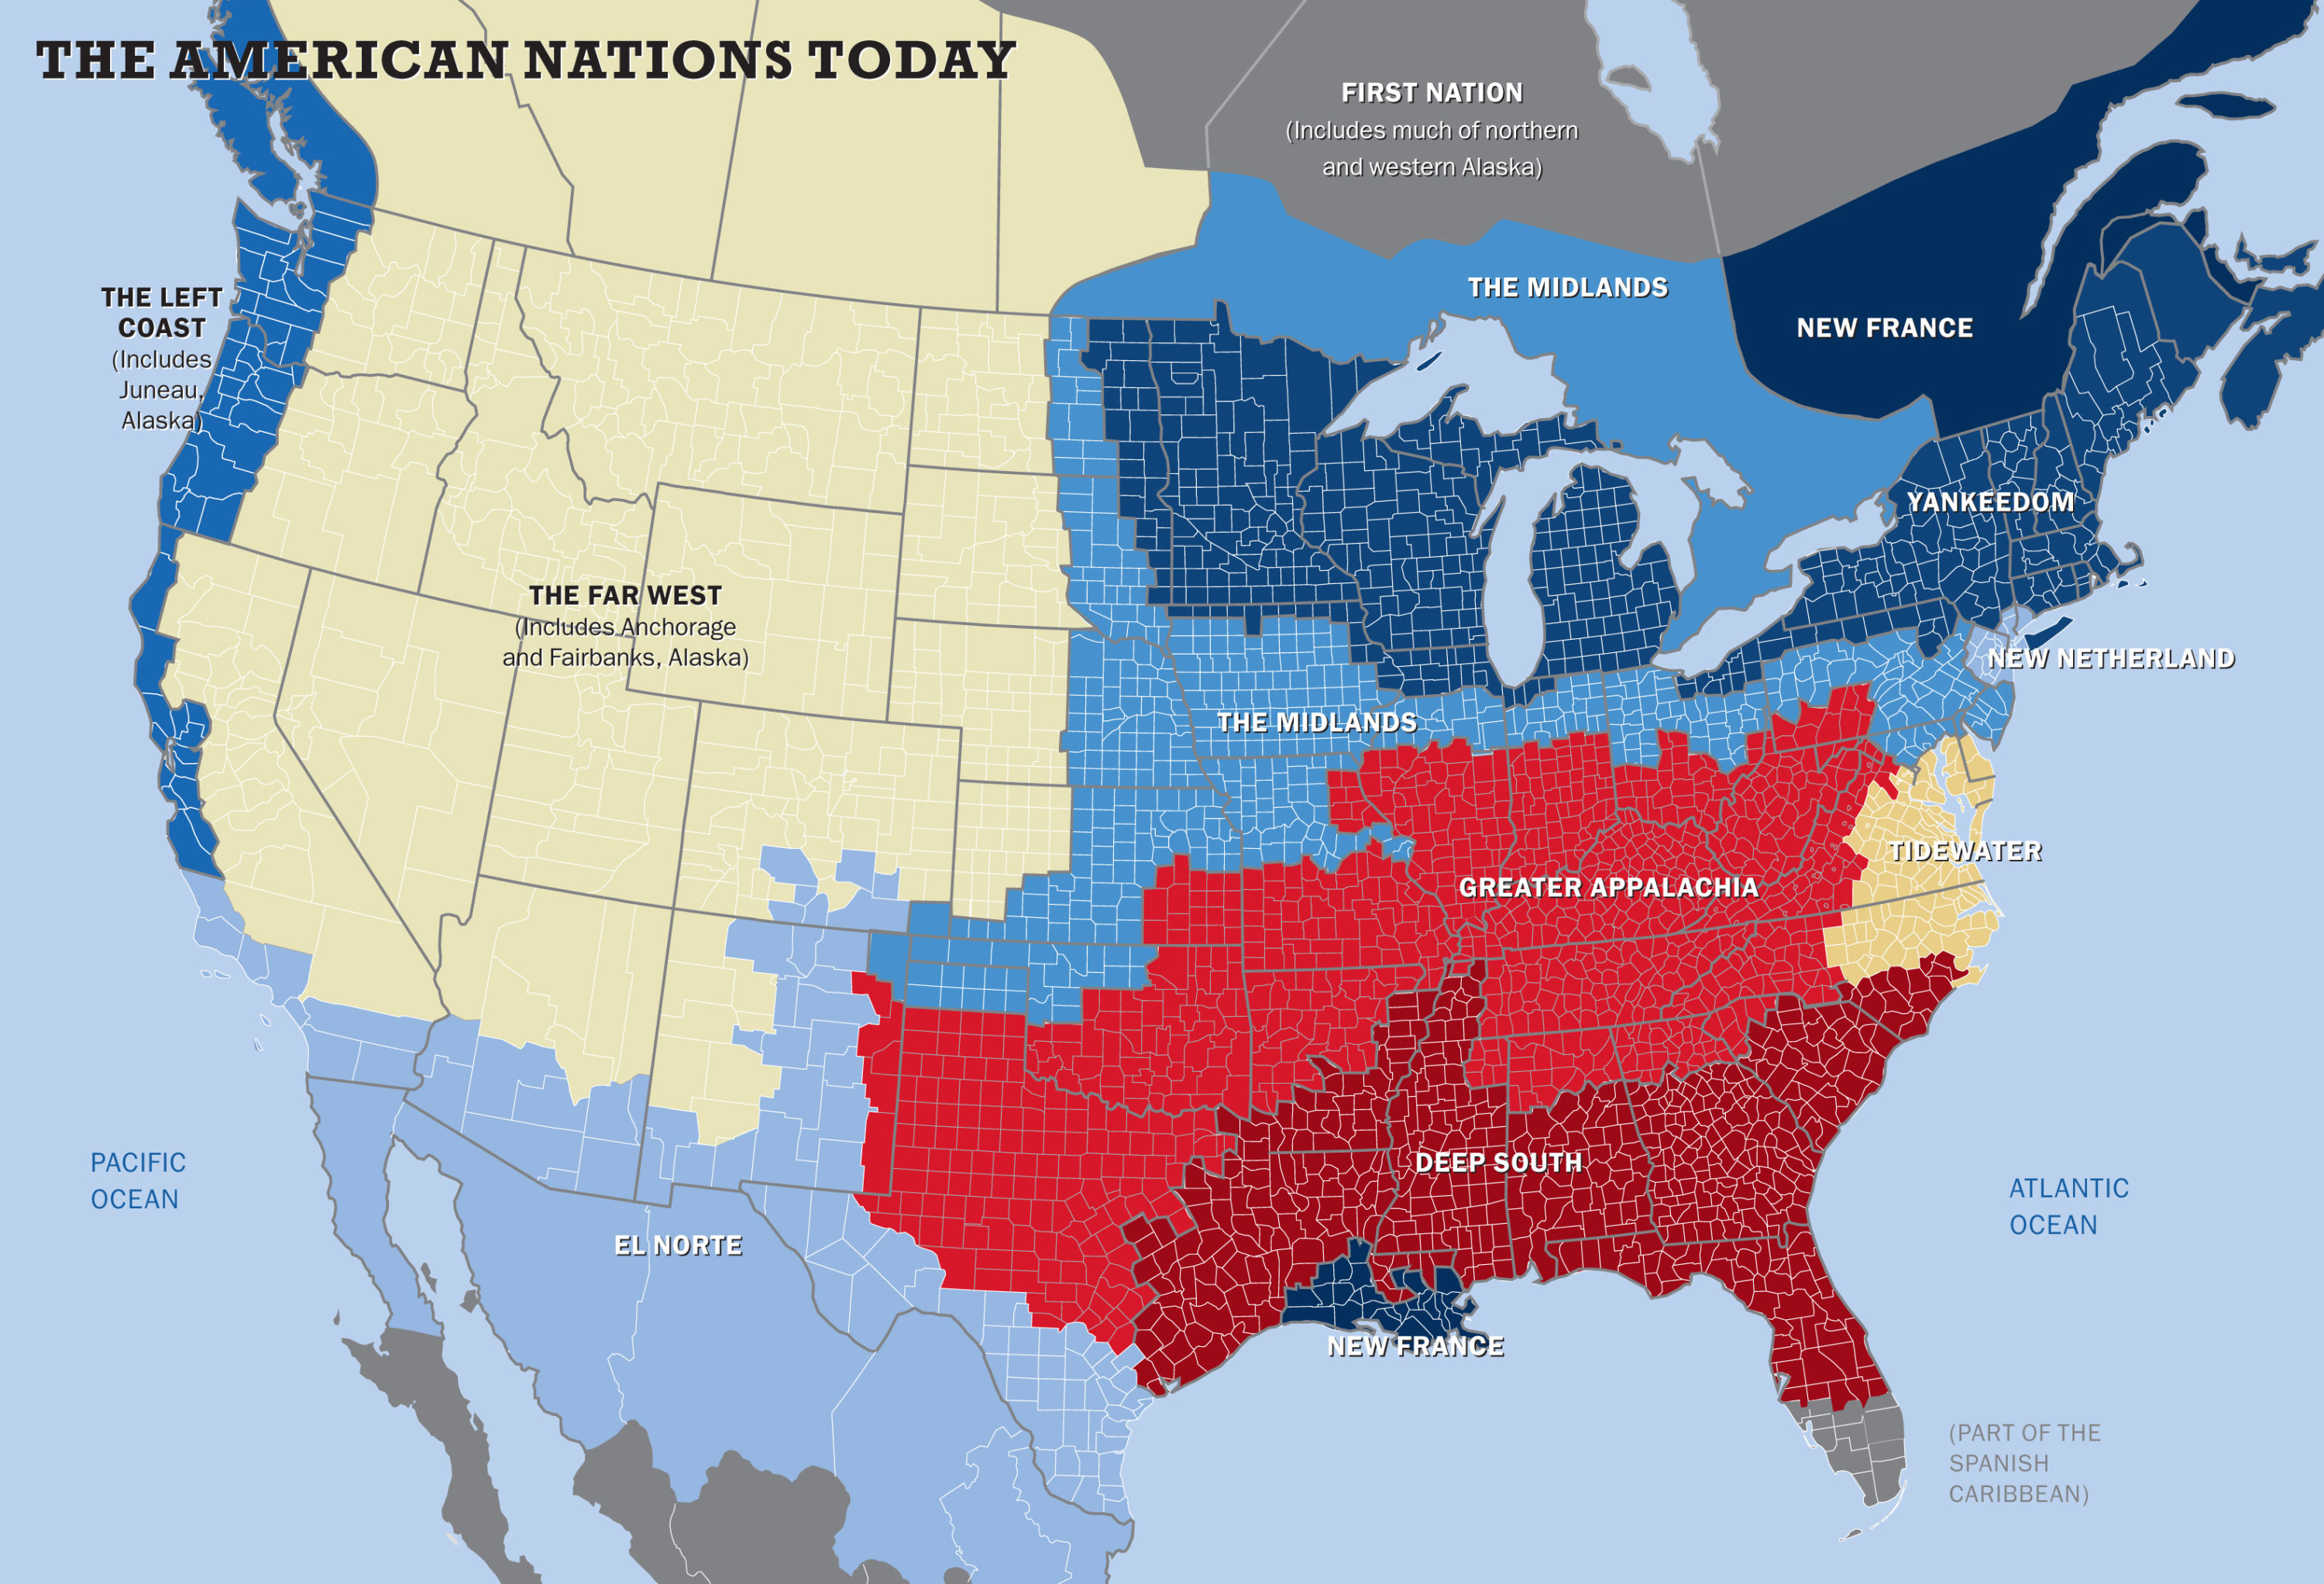 American nations today